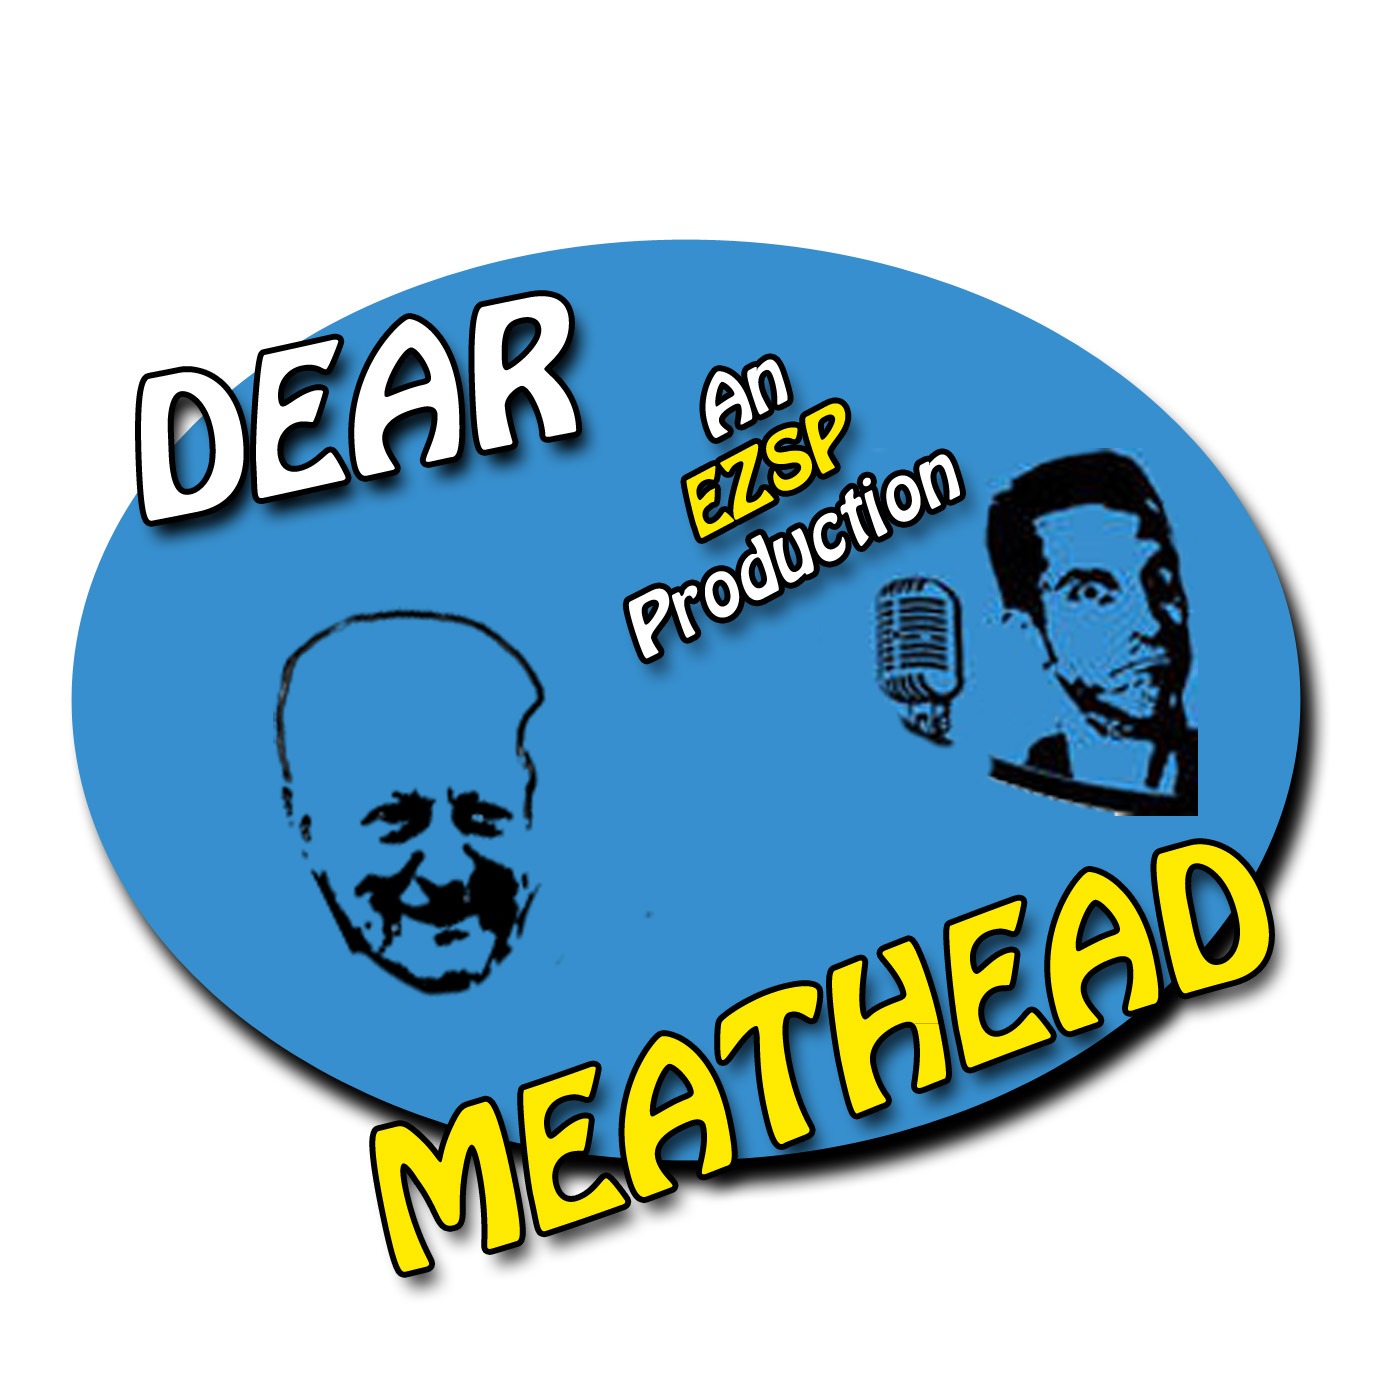 Dear Meathead Highlight 11/29 - Dad On His Bad Decisions While Driving